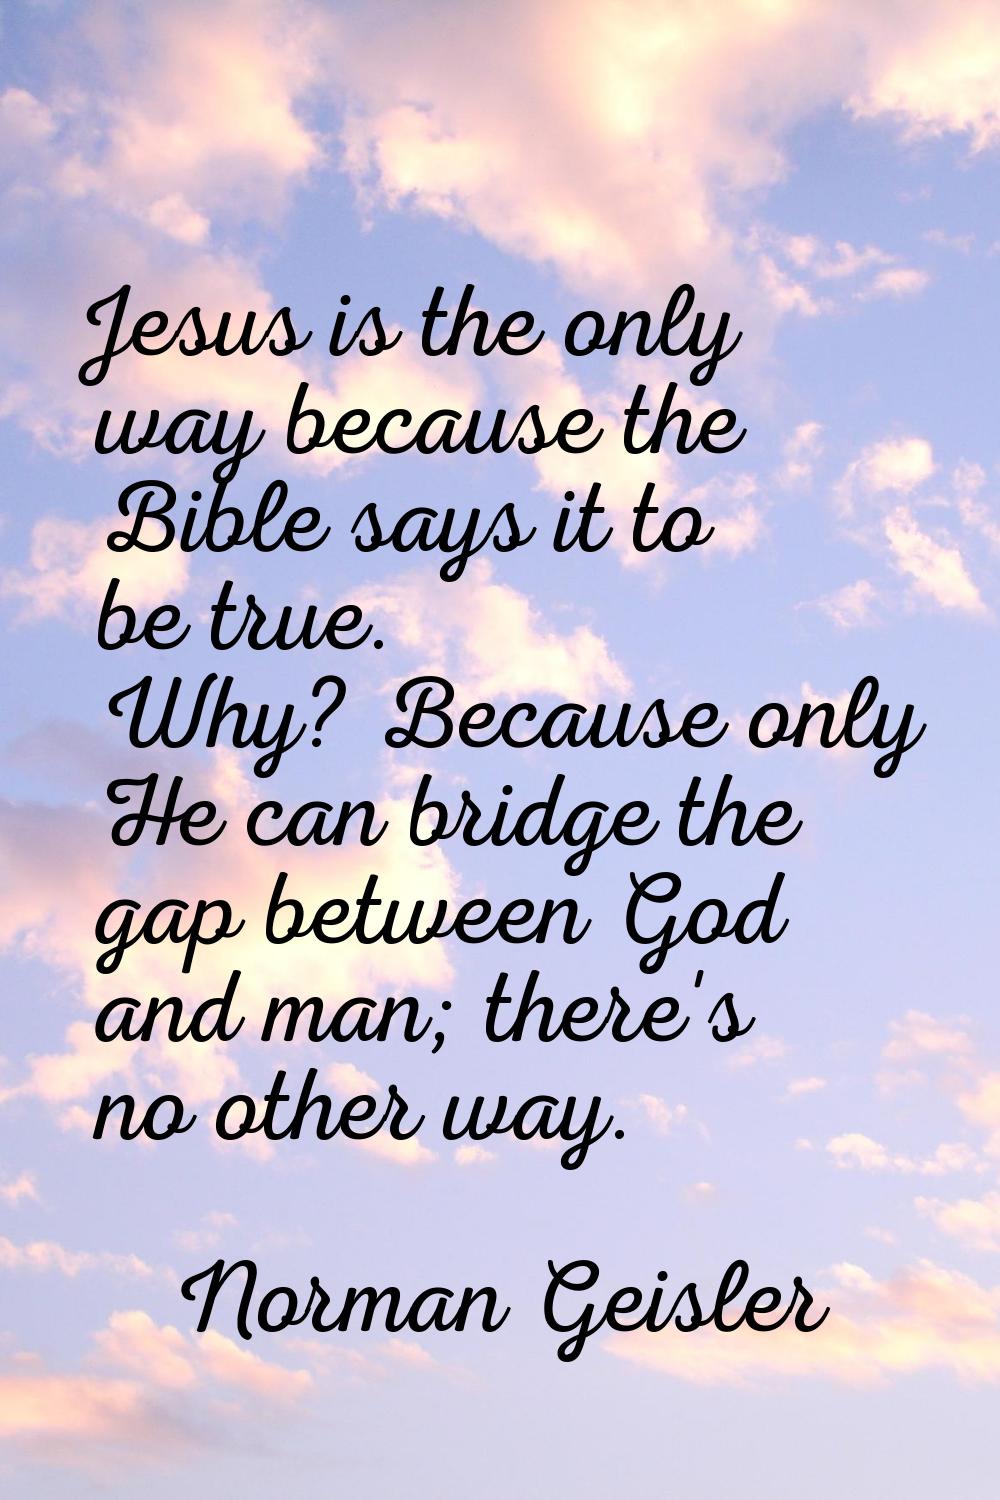 Jesus is the only way because the Bible says it to be true. Why? Because only He can bridge the gap